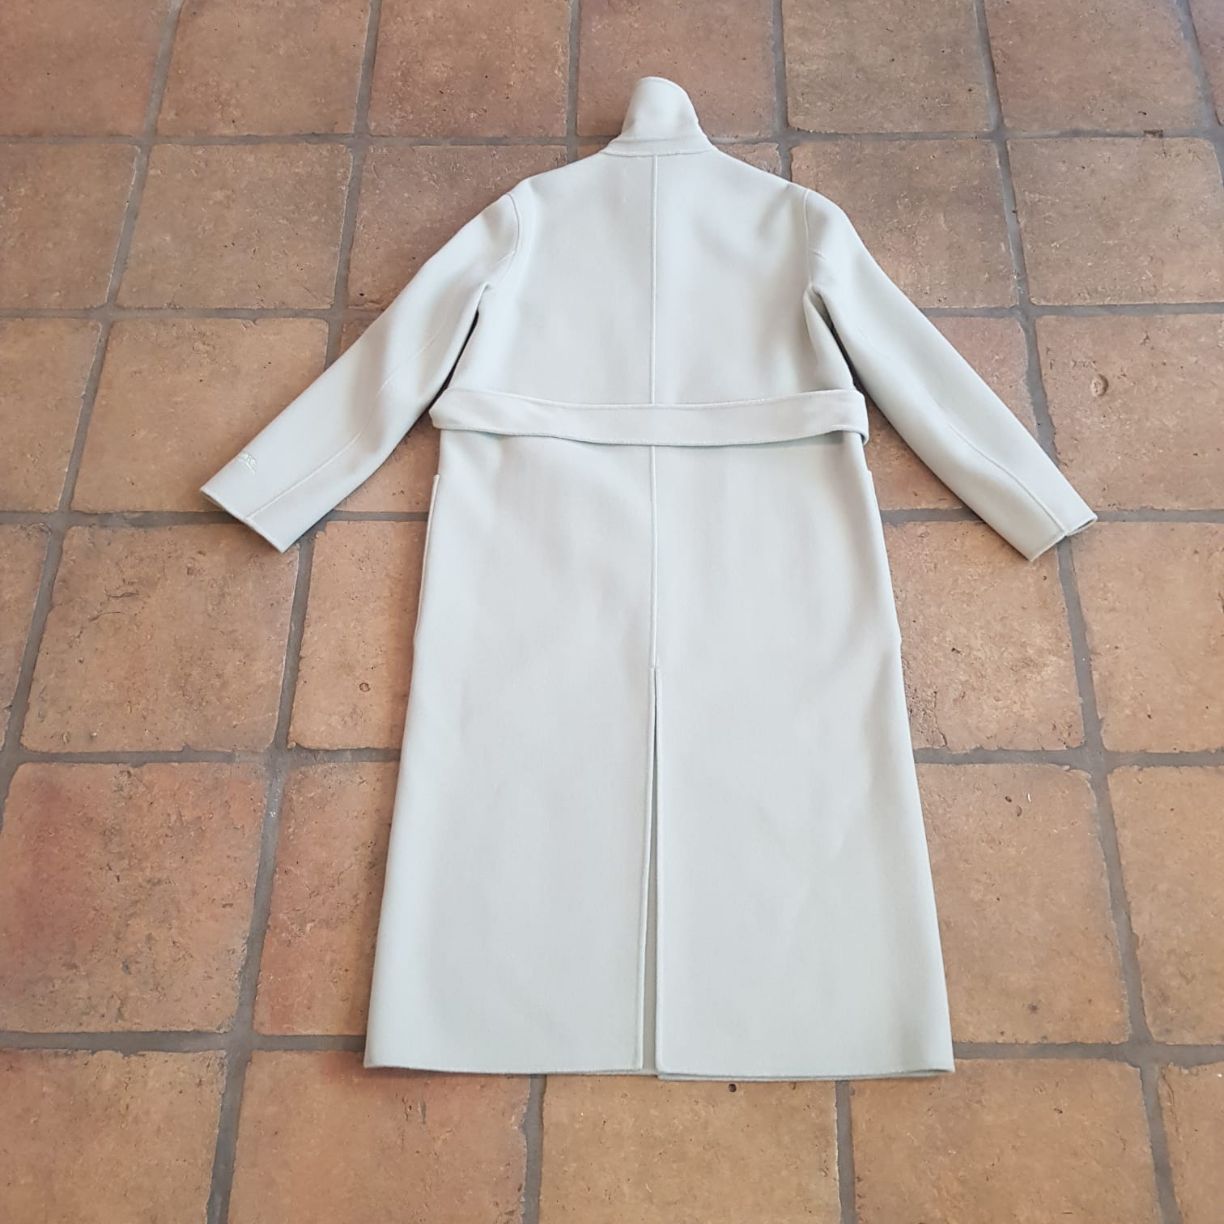 NEW KRIZIA - Coat cashmere double ling with belt